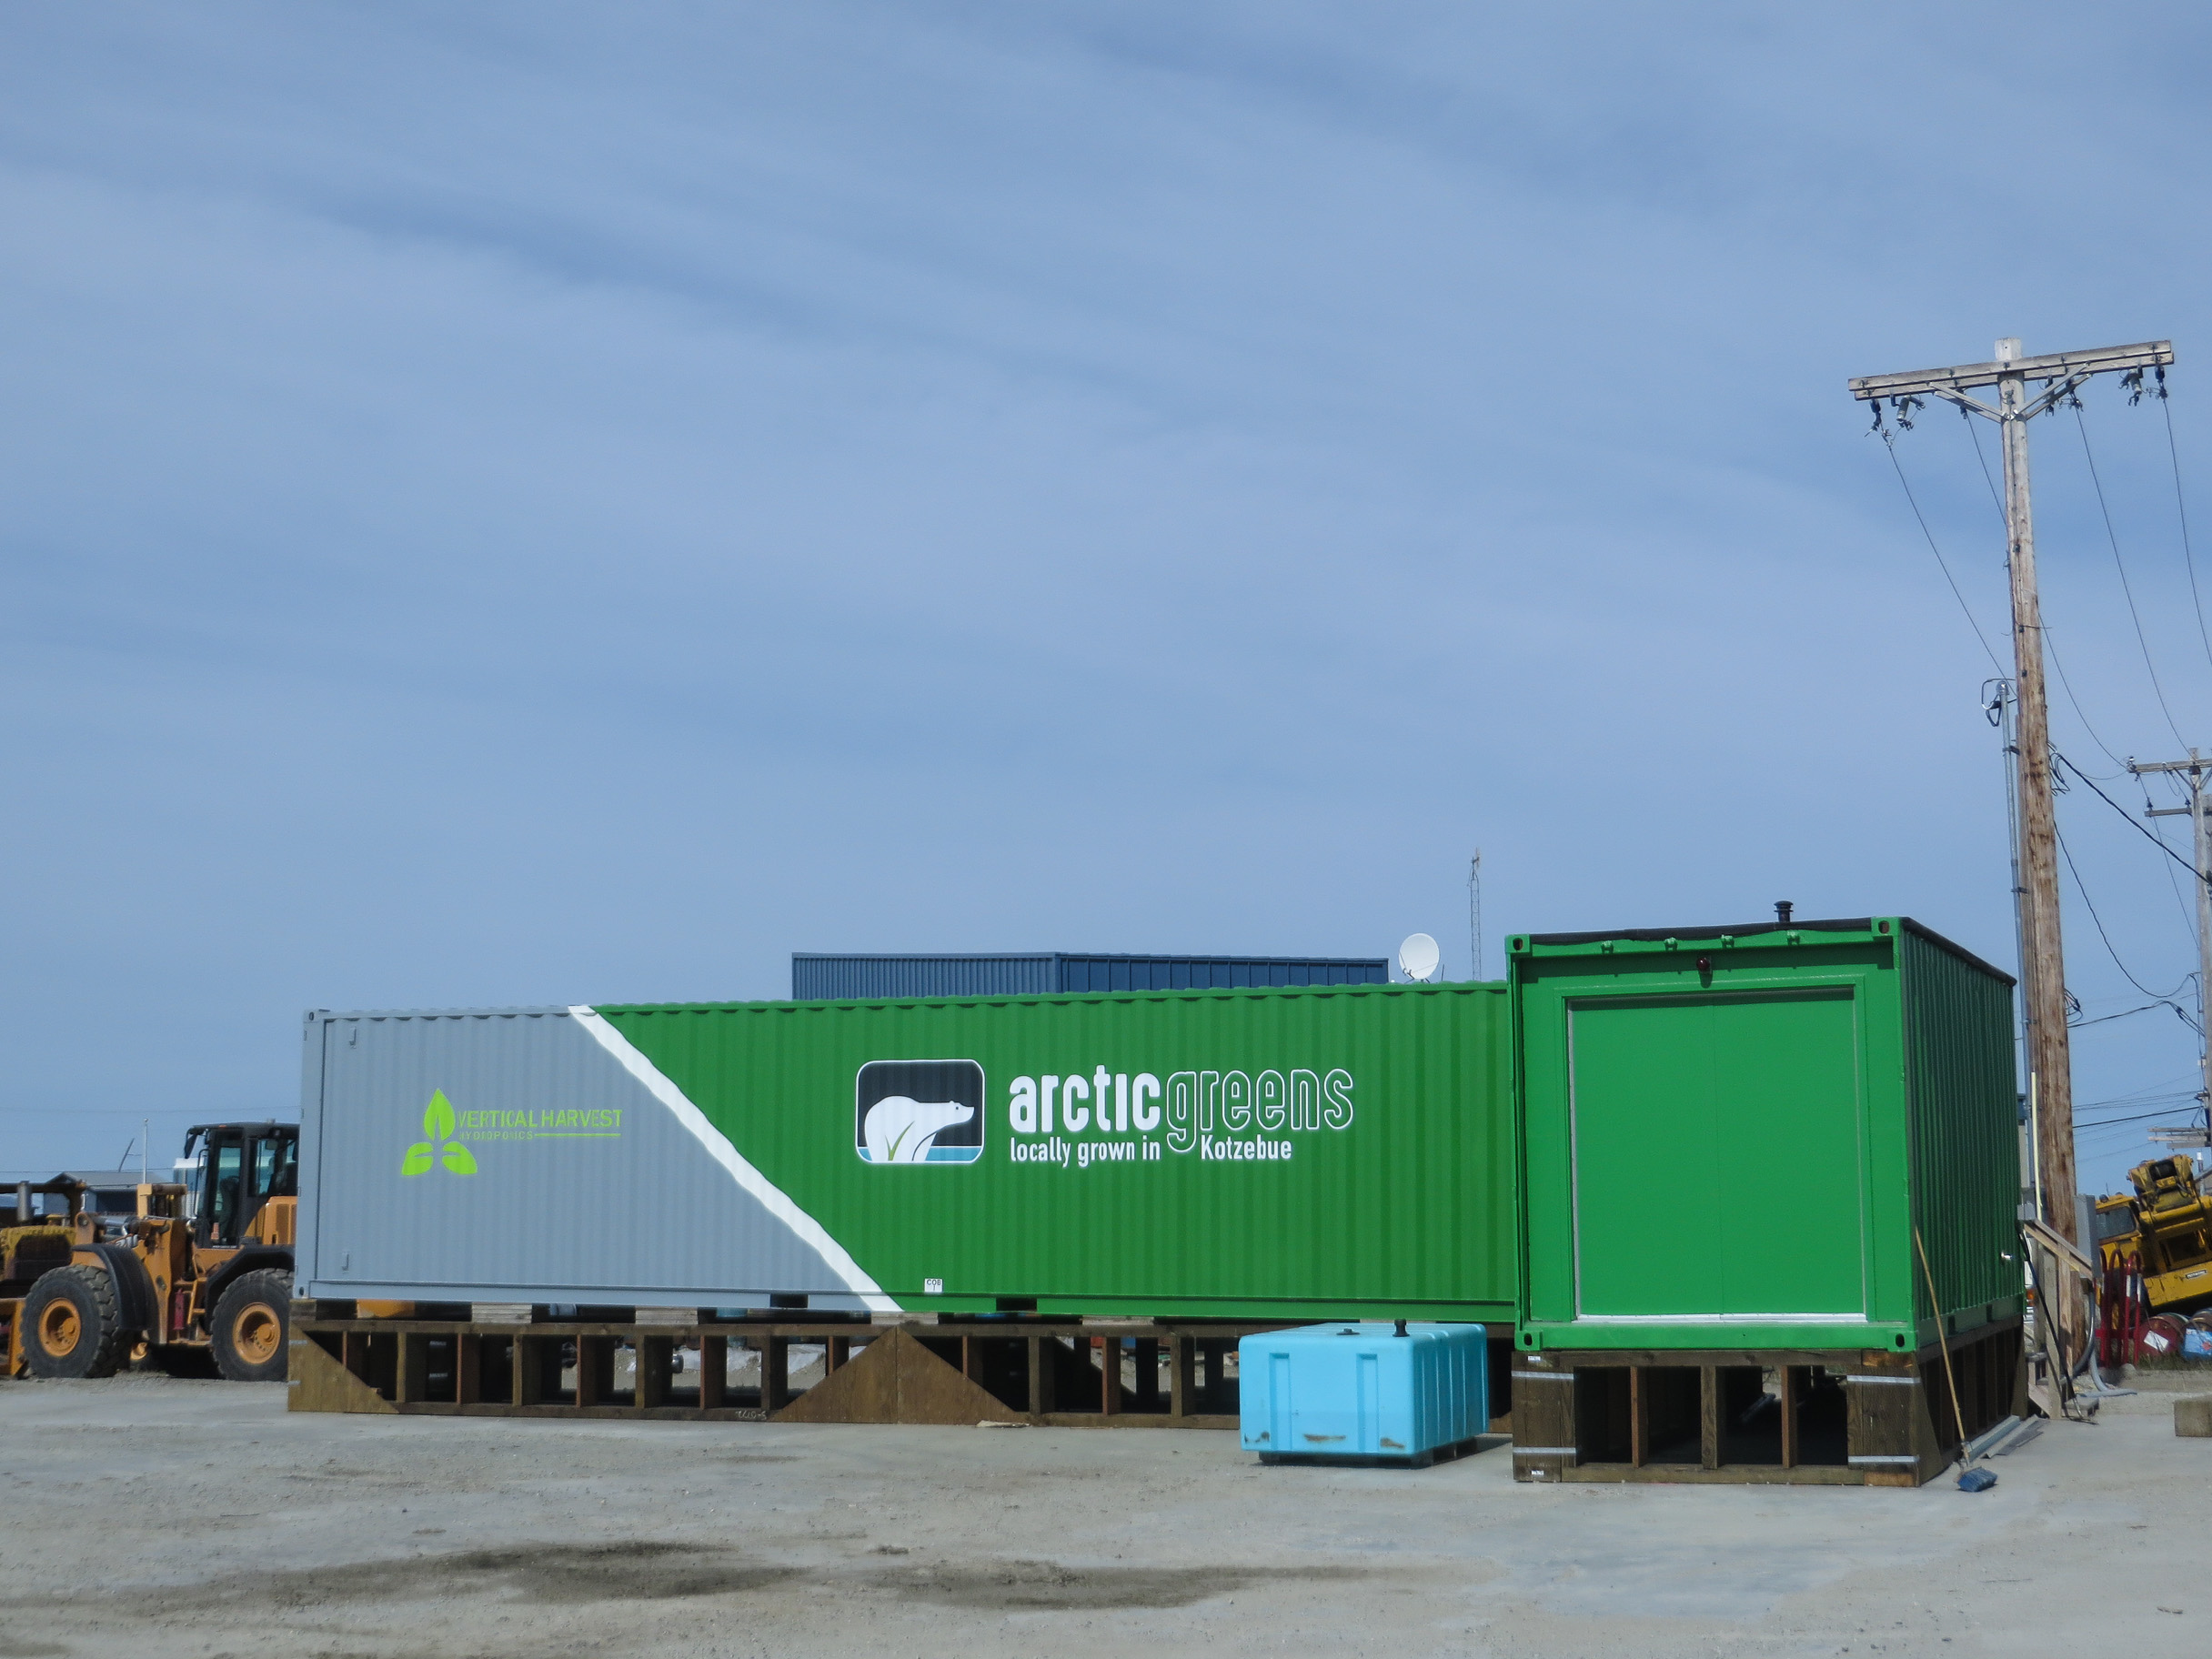 If the pilot phase goes well, Arctic Greens plans to purchase three more hydroponic connexes for the Kotzebue operation. (Photo by Laura Kraegel, KNOM - Nome)